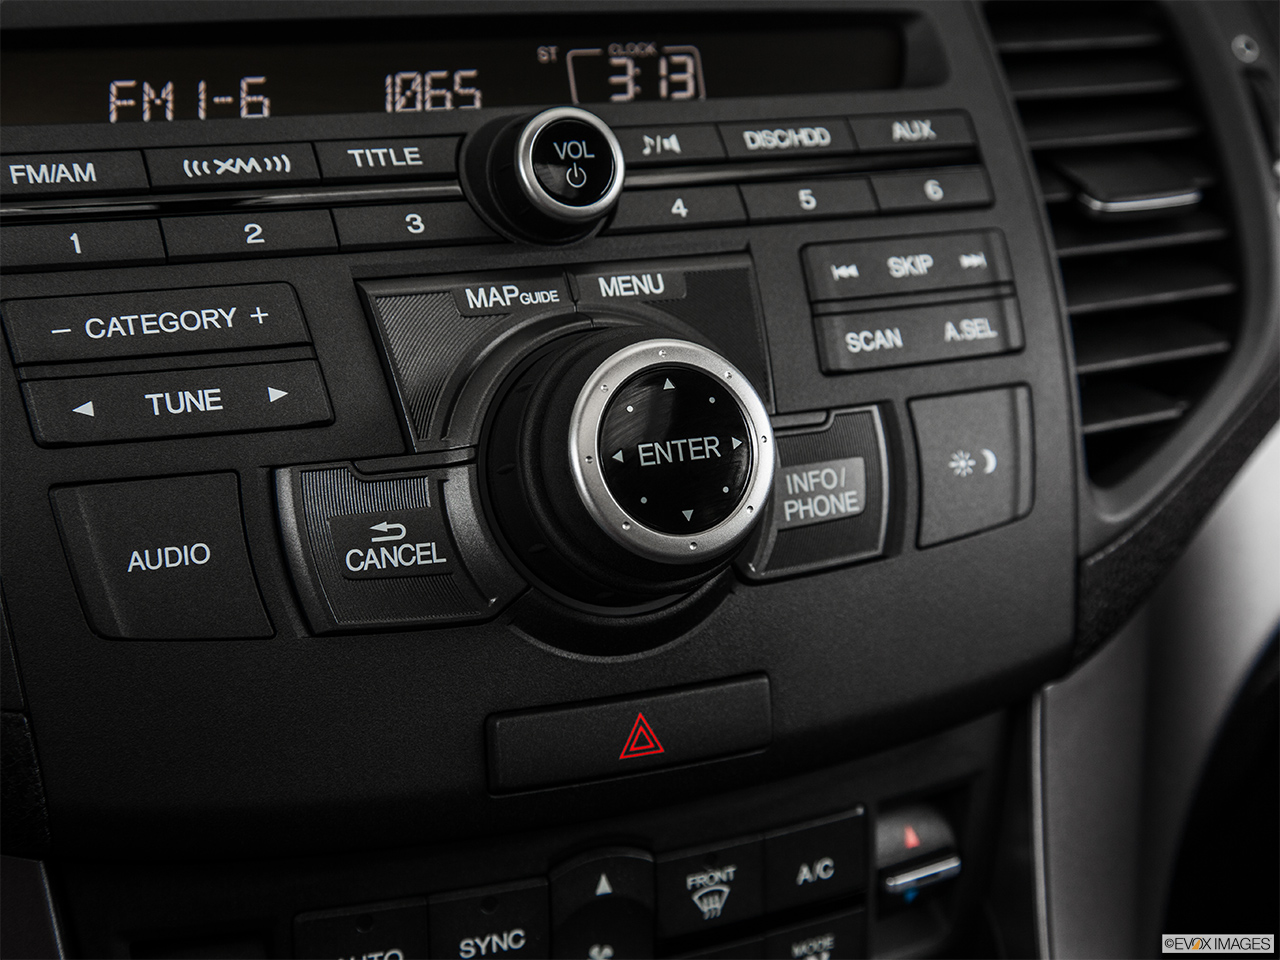 2014 Acura TSX 5-Speed Automatic System Controls. 